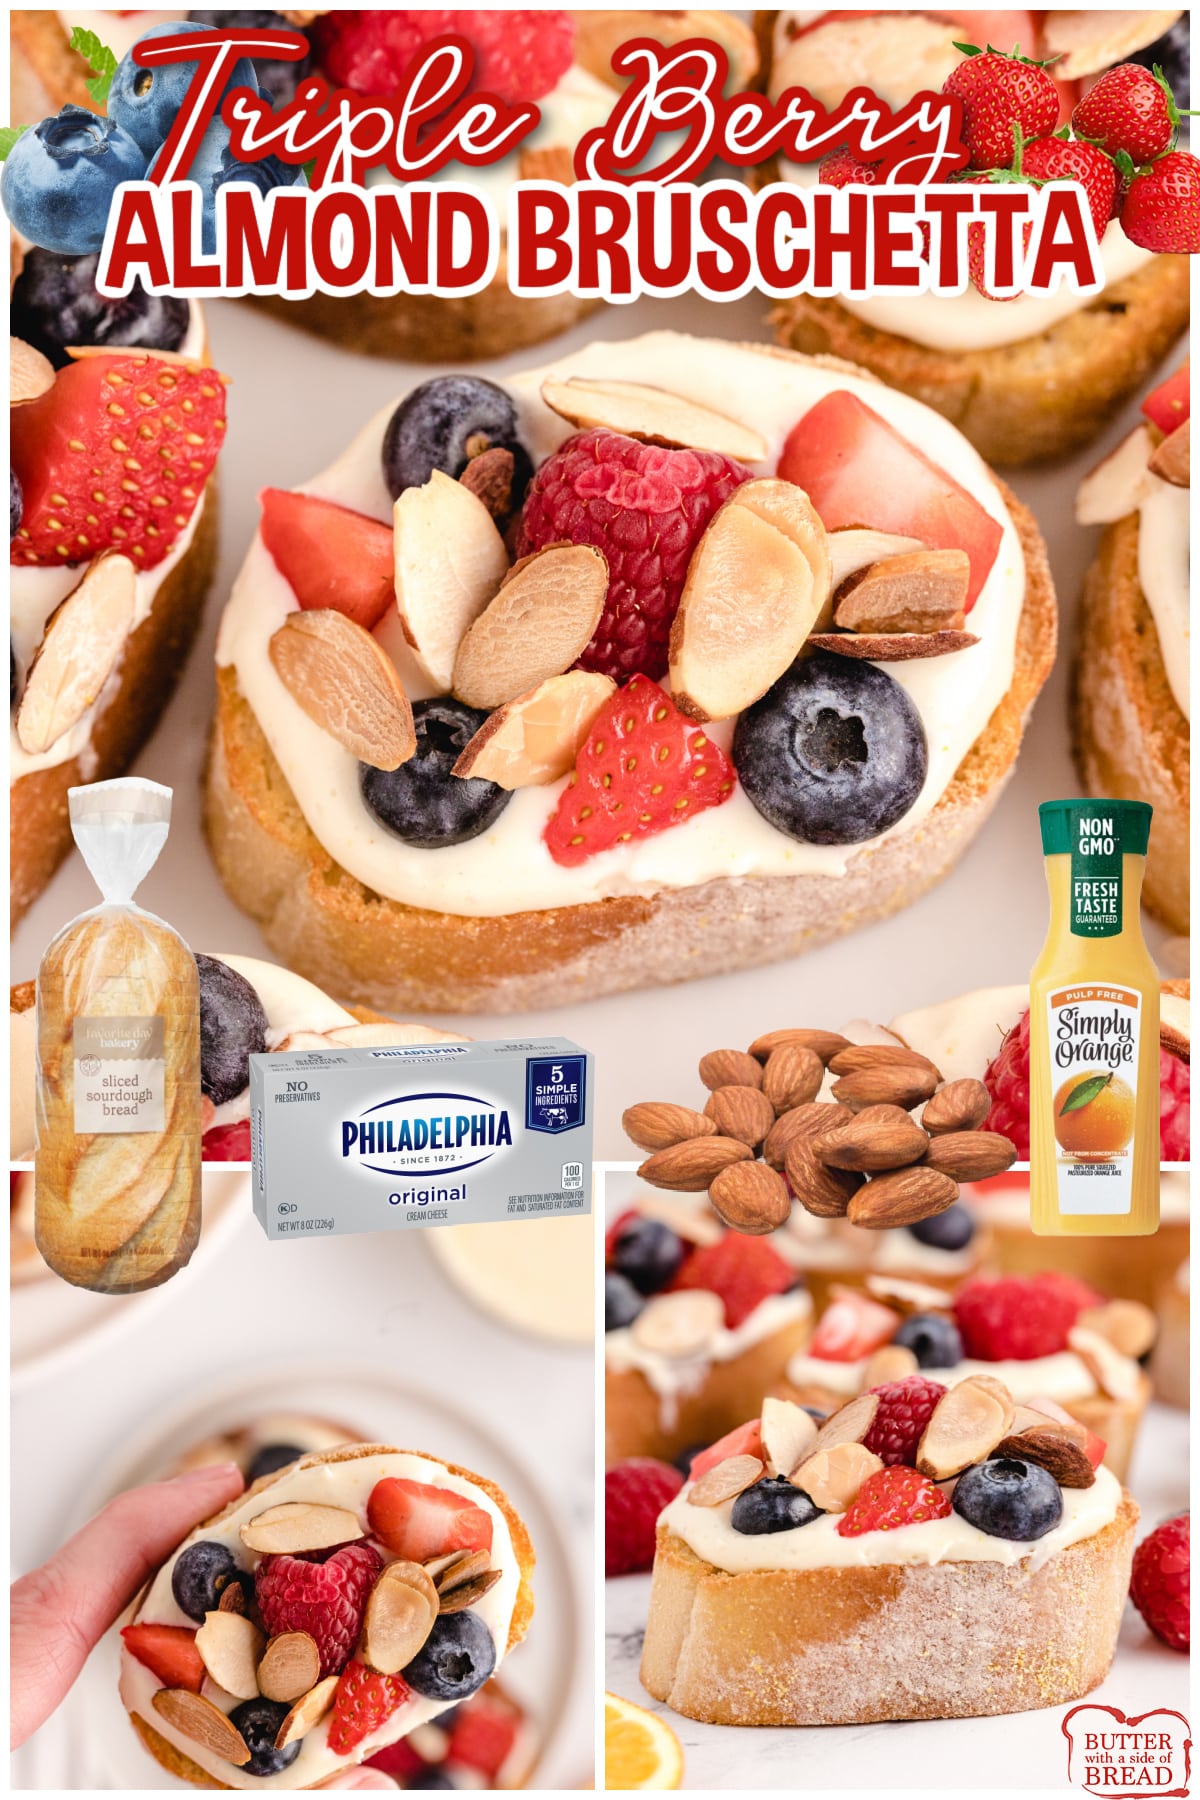 Triple Berry Almond Bruschetta is a delectable snack made with a creamy topping and fresh berries. Making this fresh berry bruschetta is so simple - in under 30 minutes you will have a sensational dish to serve and impress your family or friends! 